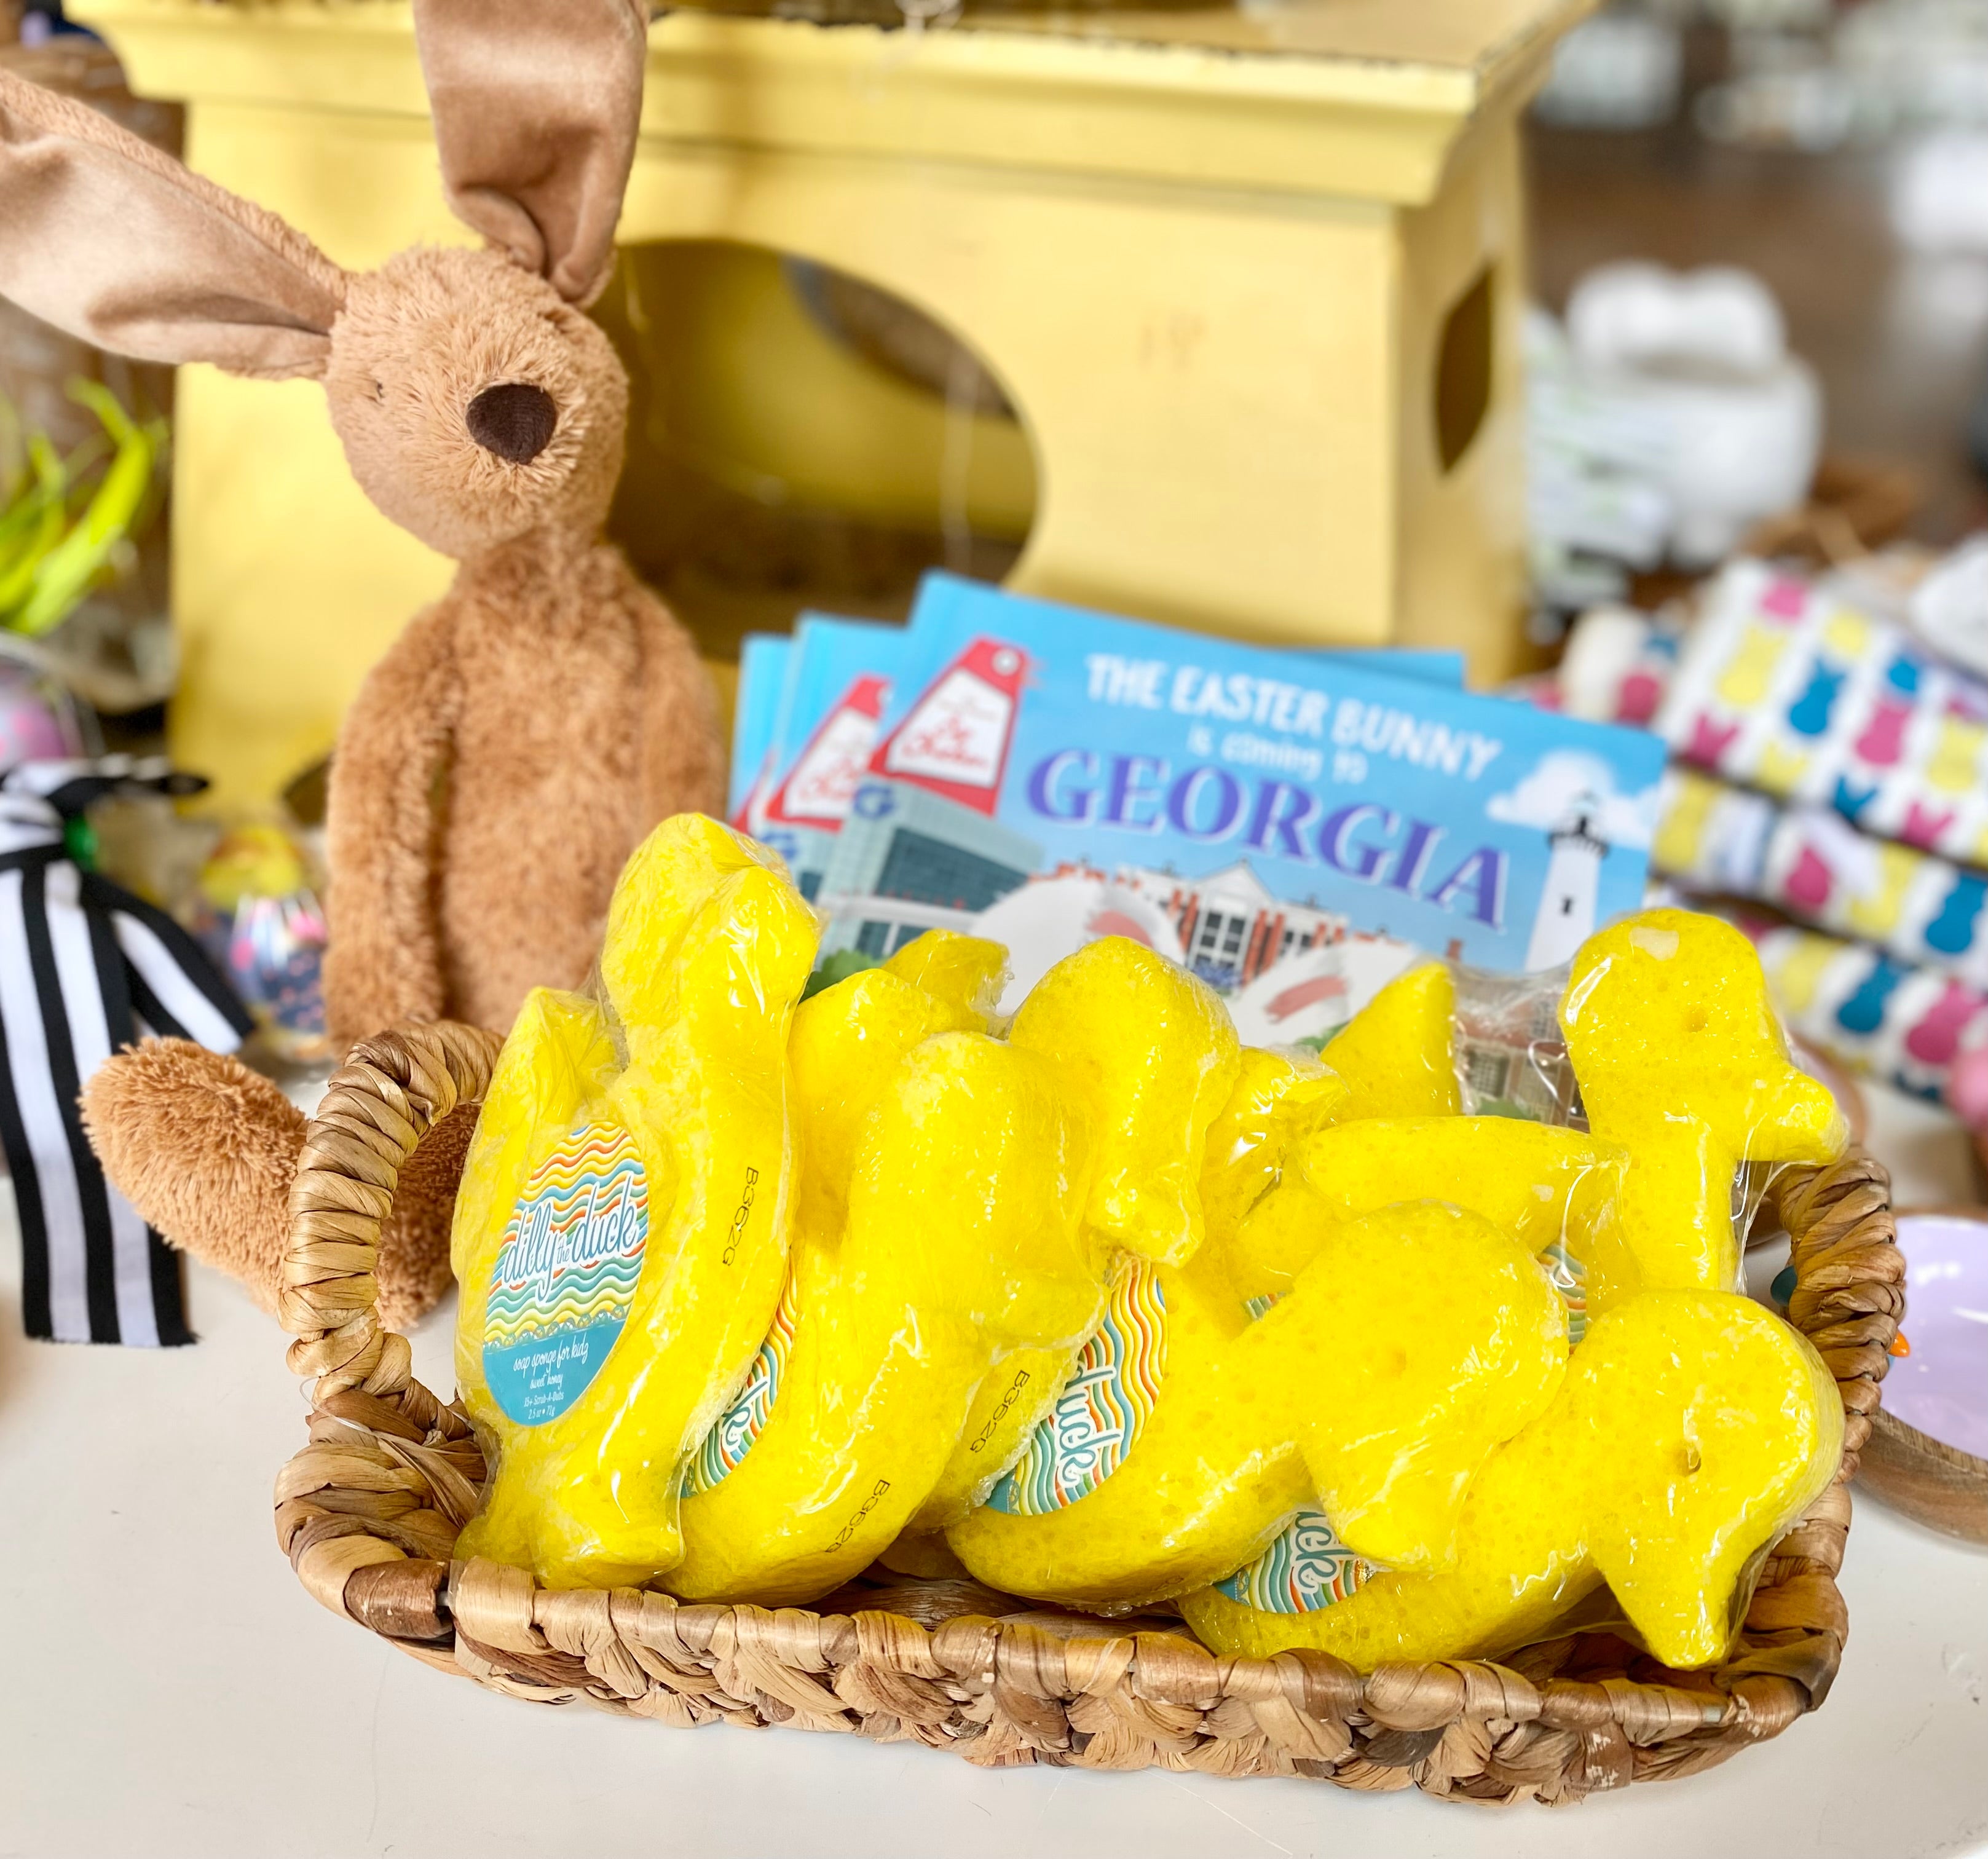 Dilly the Duck Soap Sponge for Kids